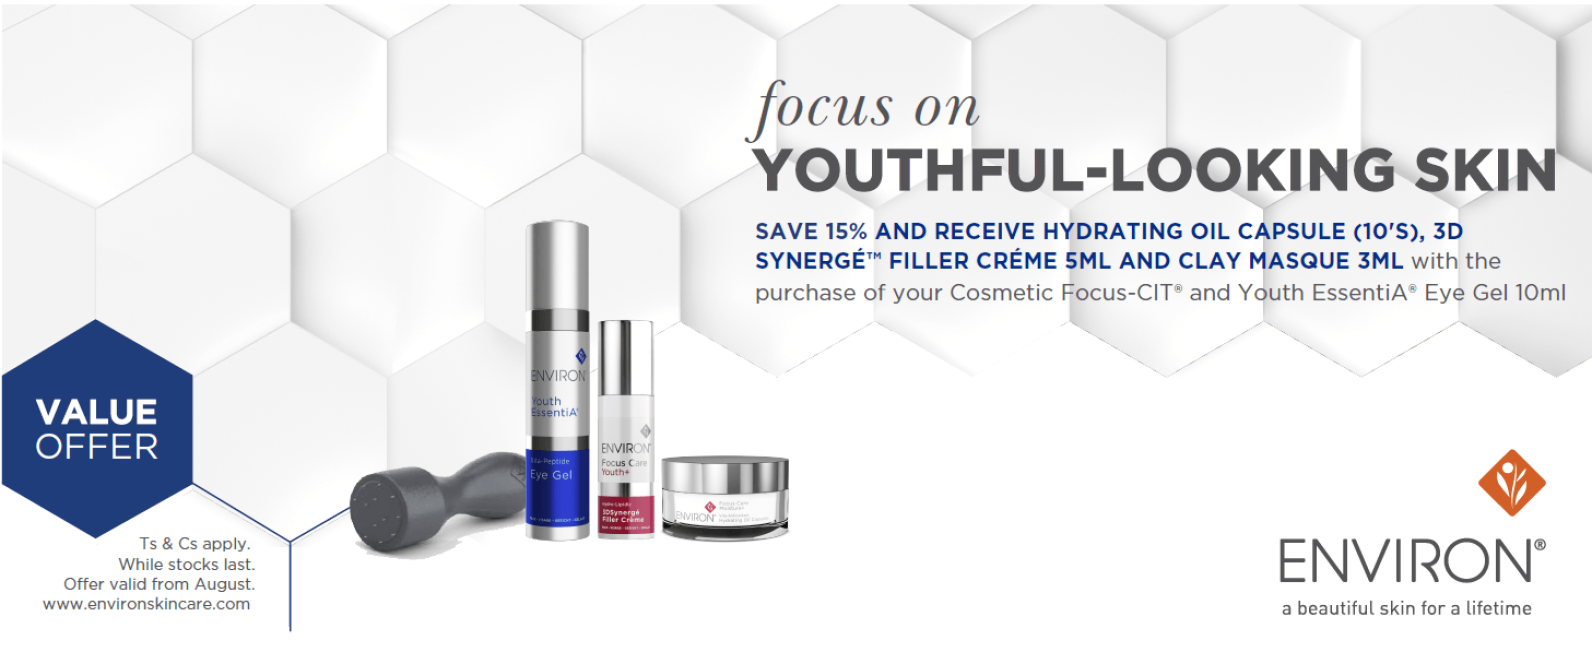 Focus On Youthful-Looking Skin